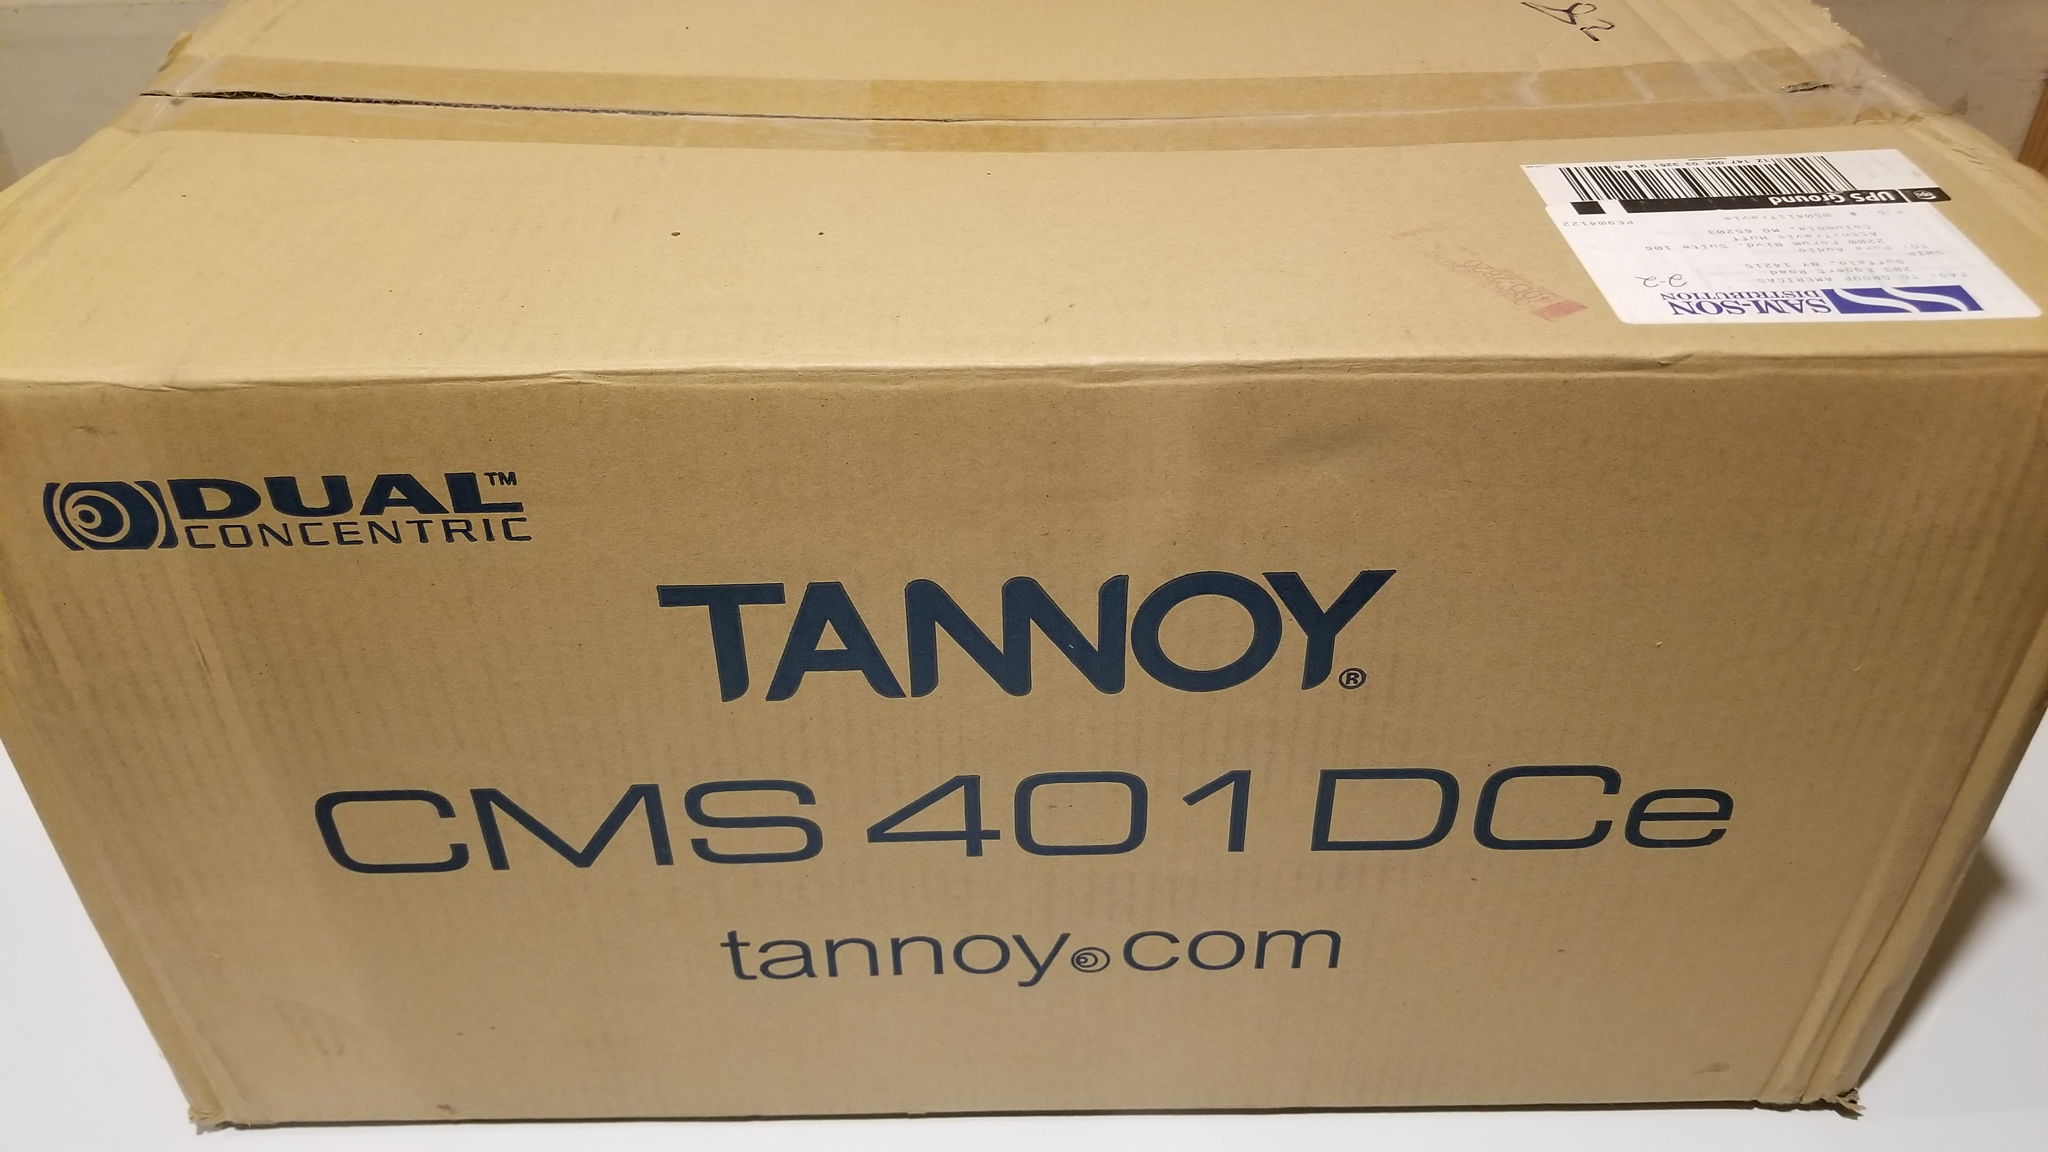 Tannoy iw6 TDC and CMS 401DCe Speakers 10